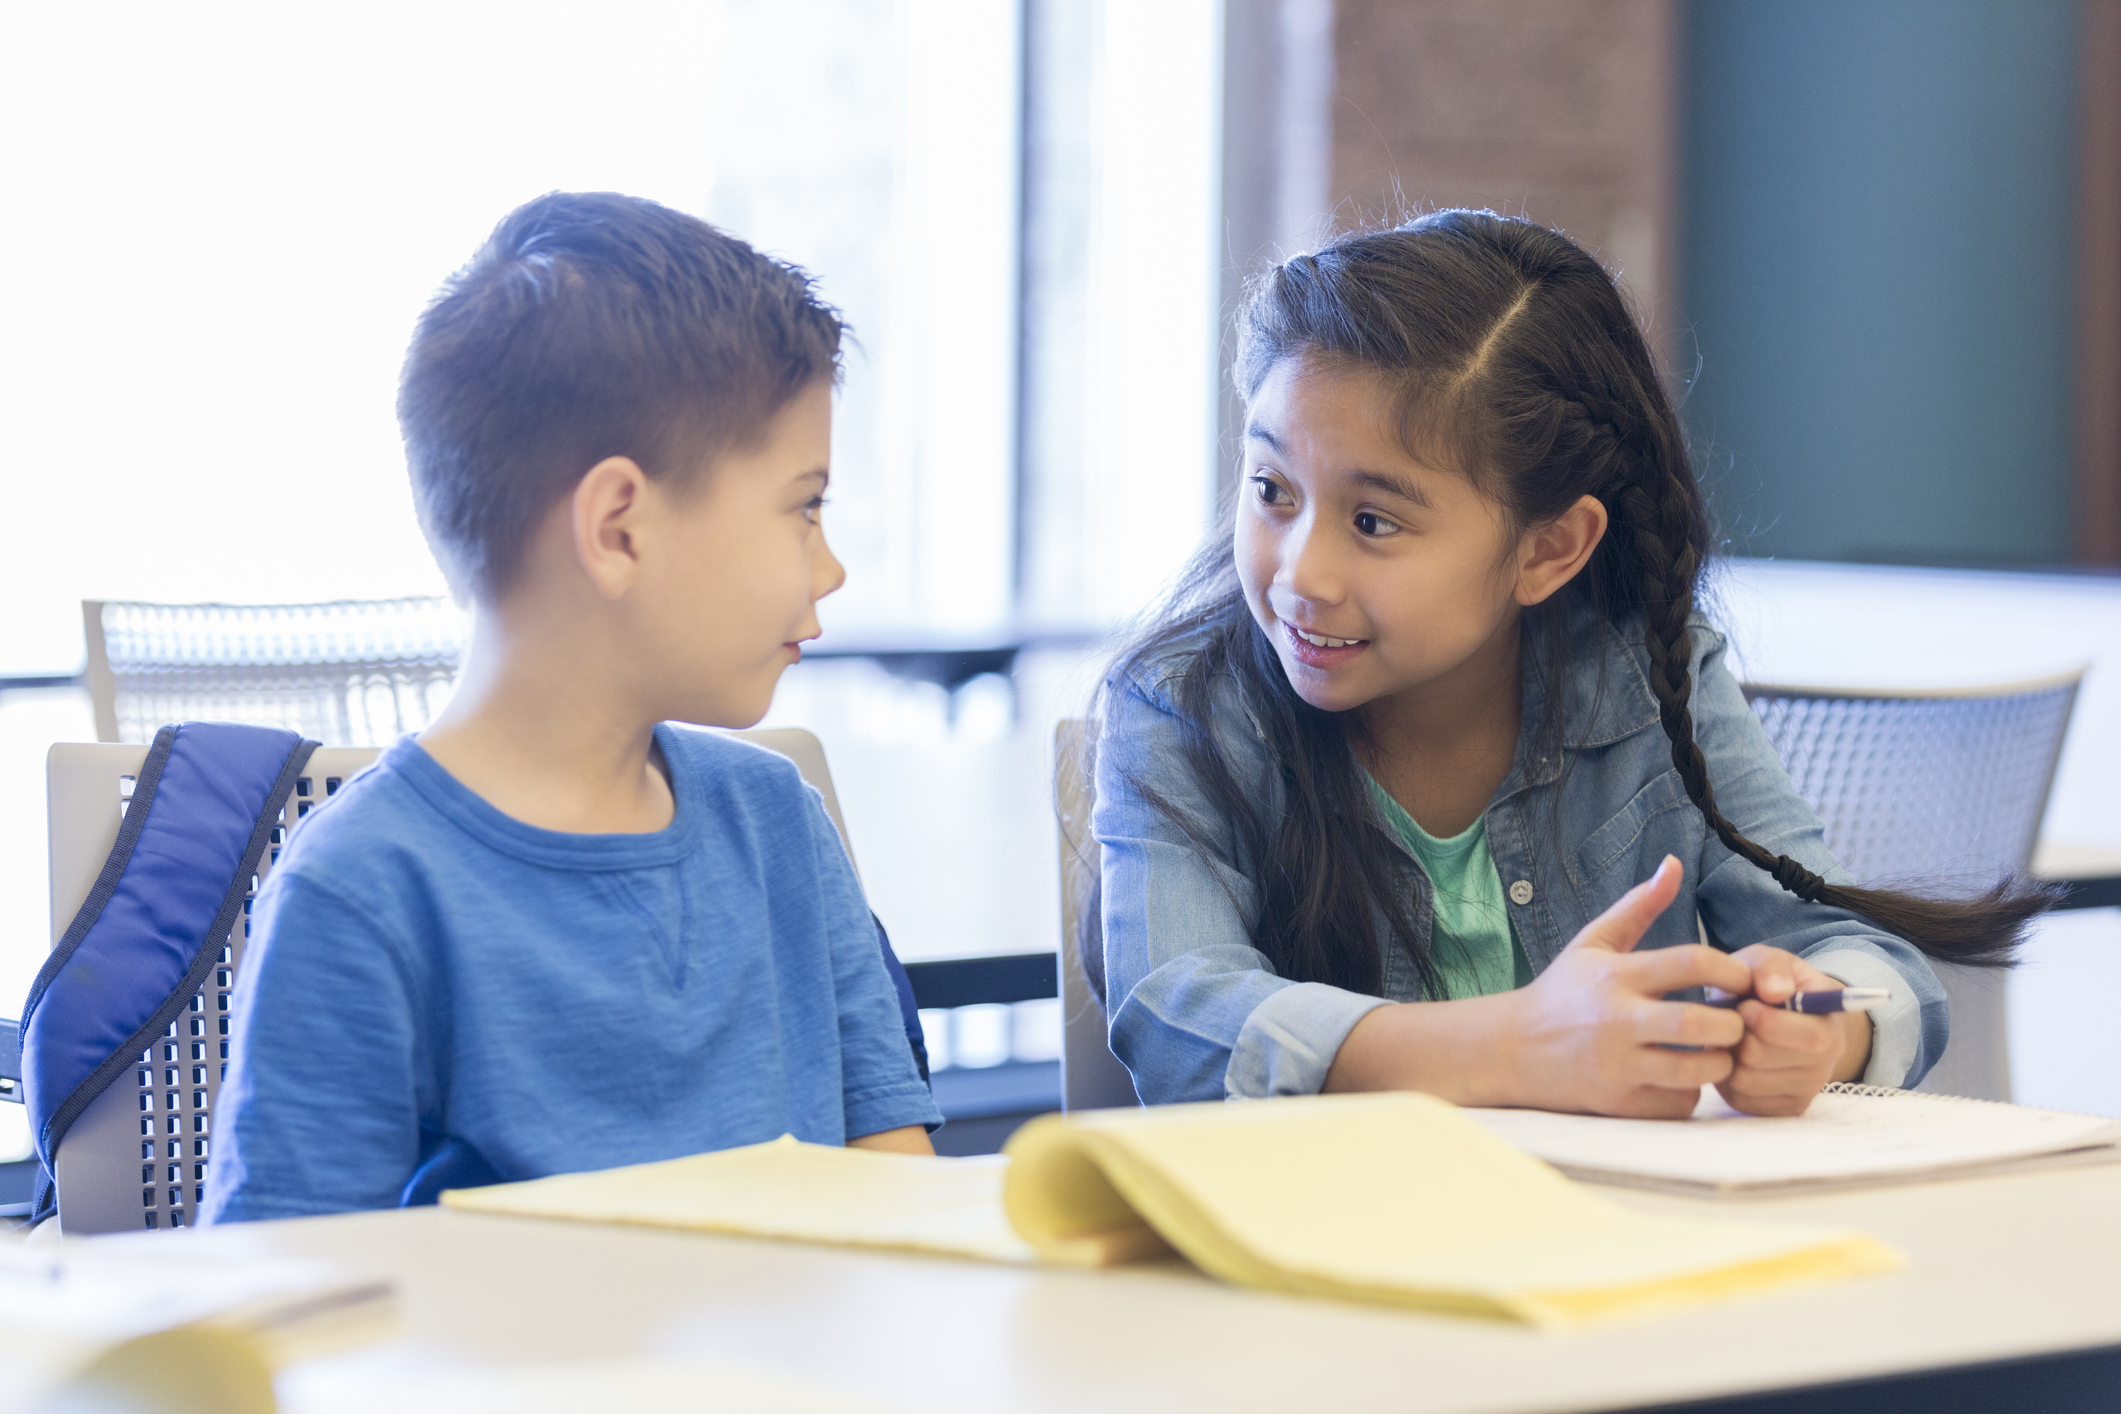 Pairing your new student up with a buddy can help them transition to a new school socially.